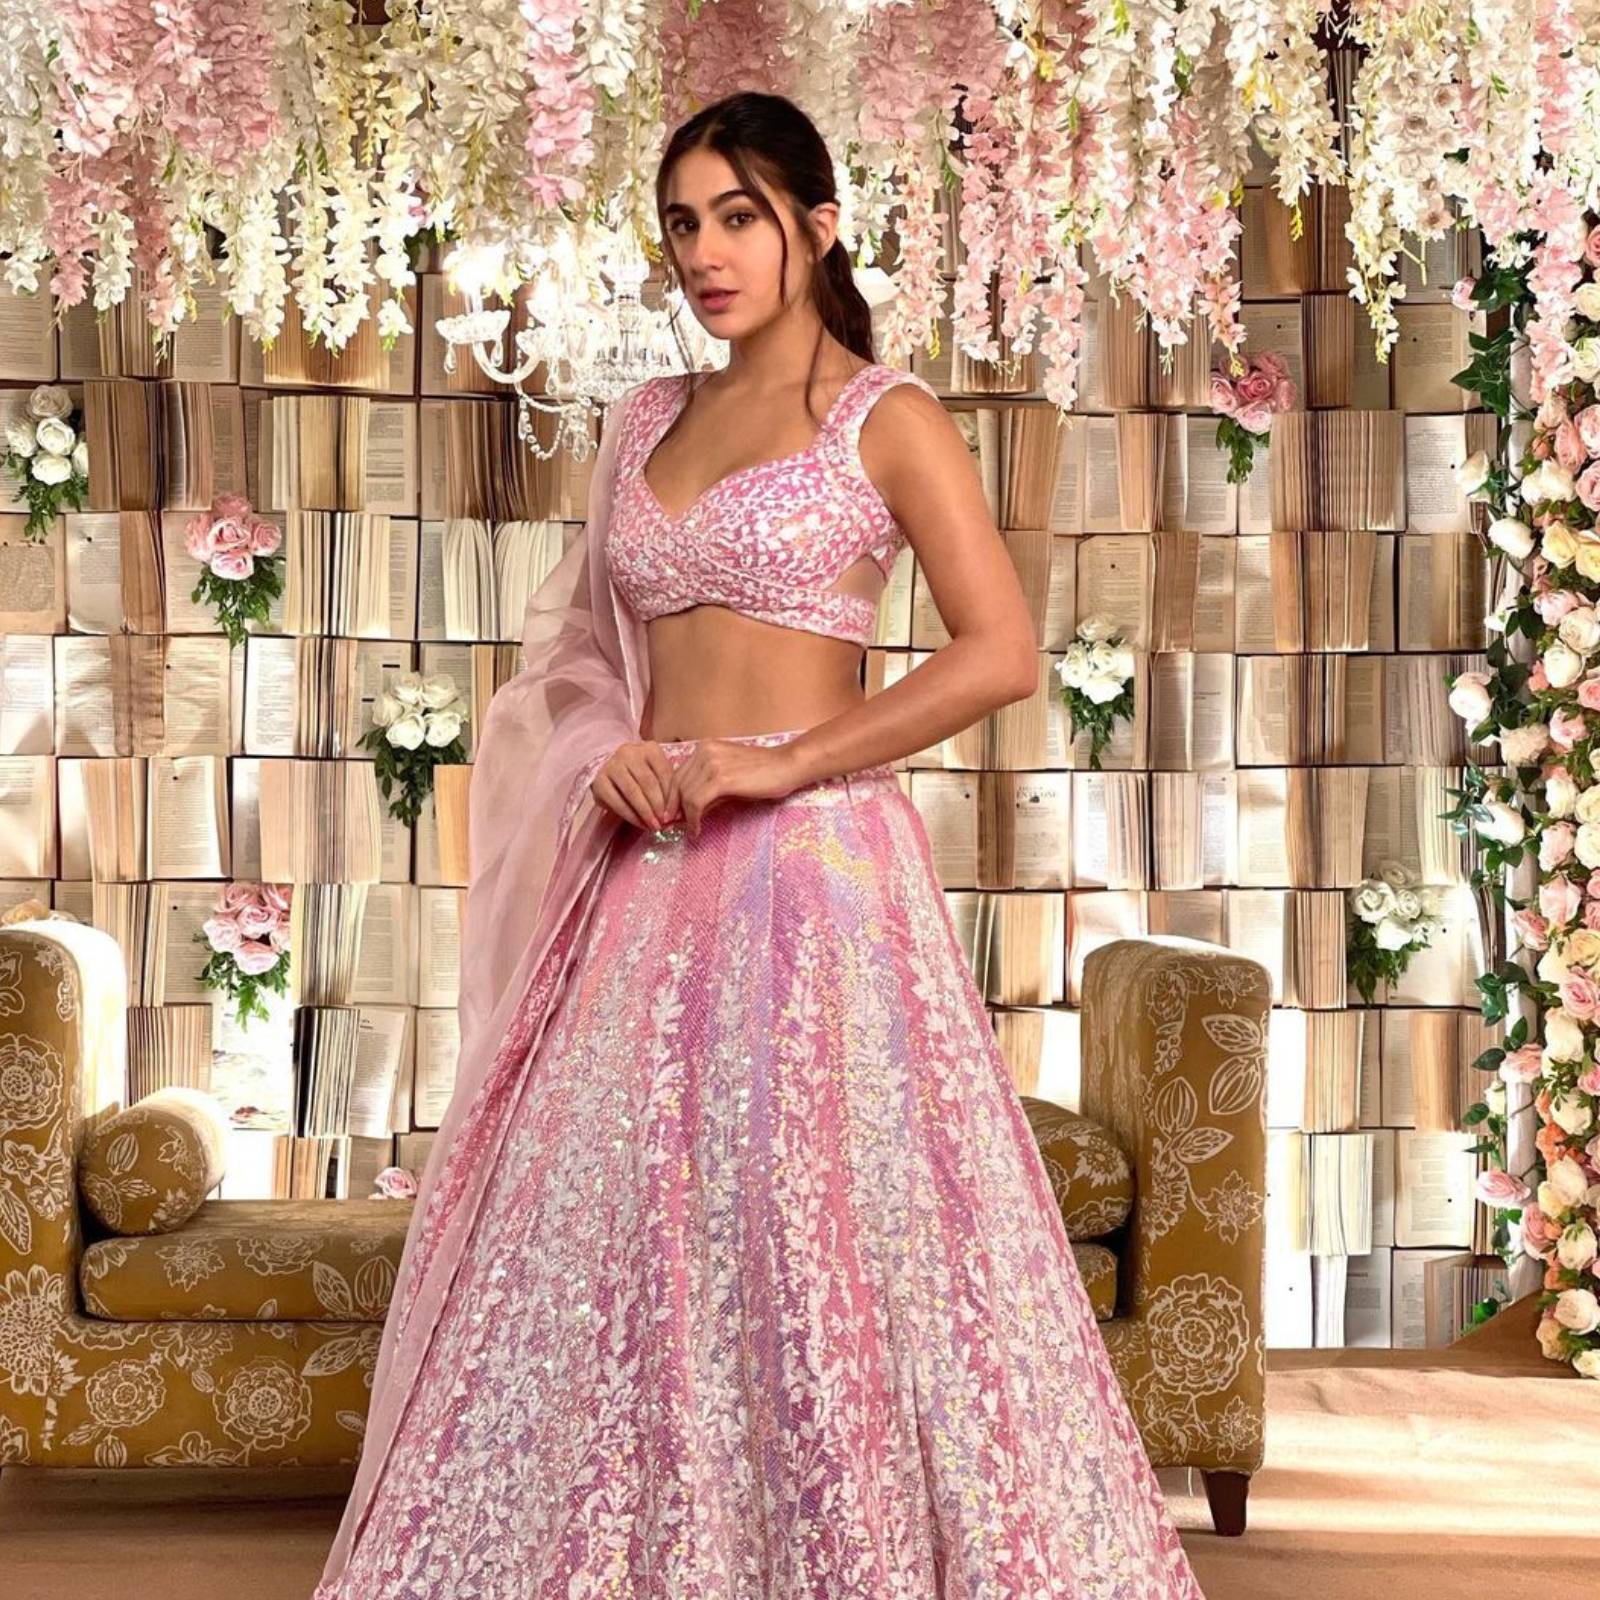  Sara Ali Khan looks like a dream in a pink ethnic outfit. (Image: Instagram)